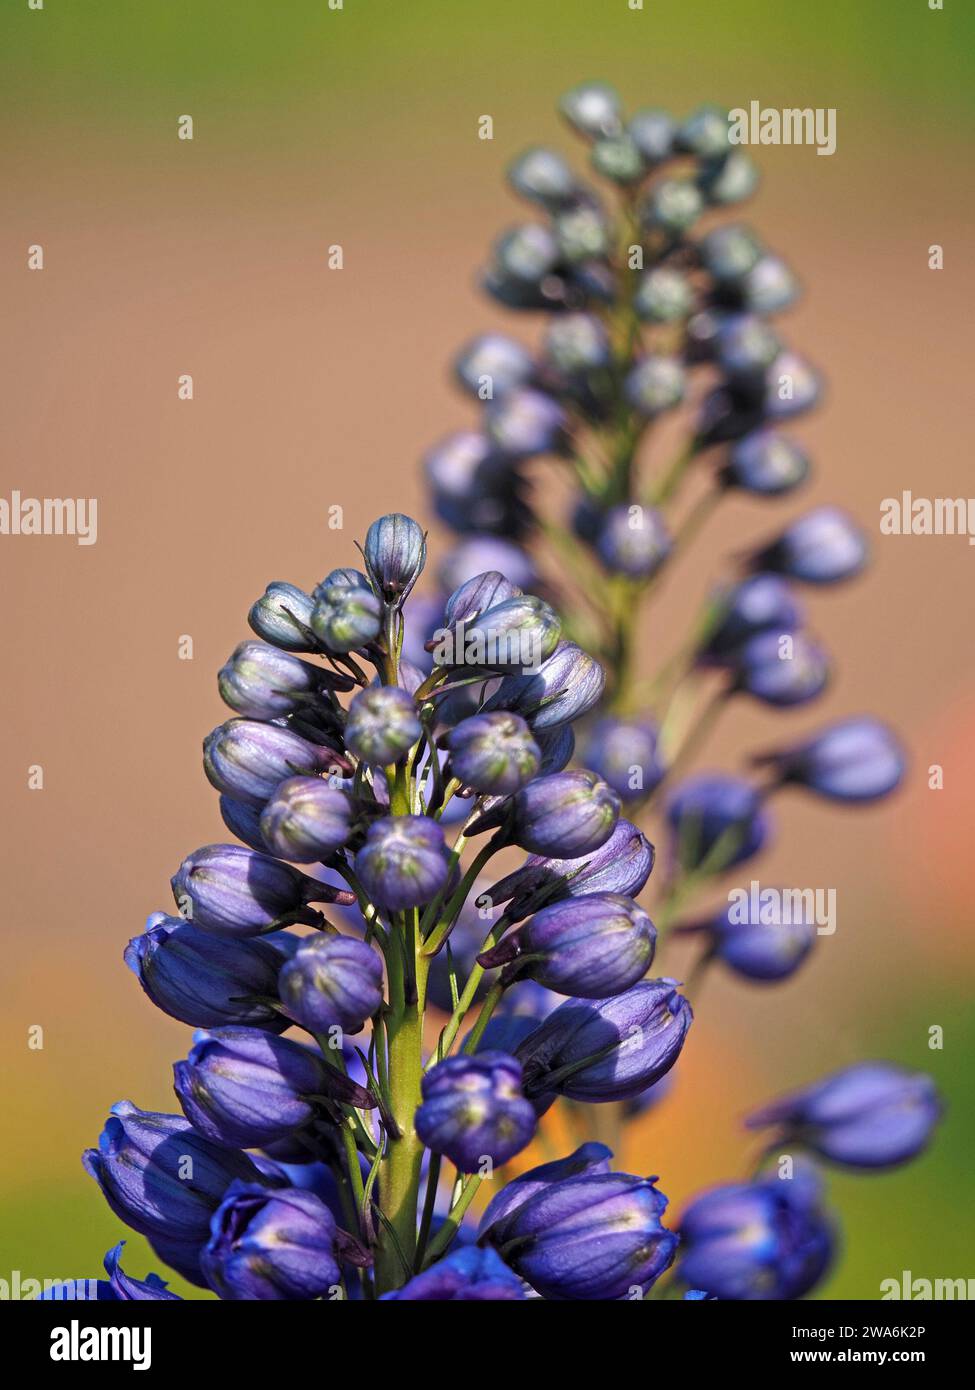 artistic differential focus image of cultivated Dark Blue & White Bee Delphinium buds - out of focus repetition in soft pastel green orange background Stock Photo